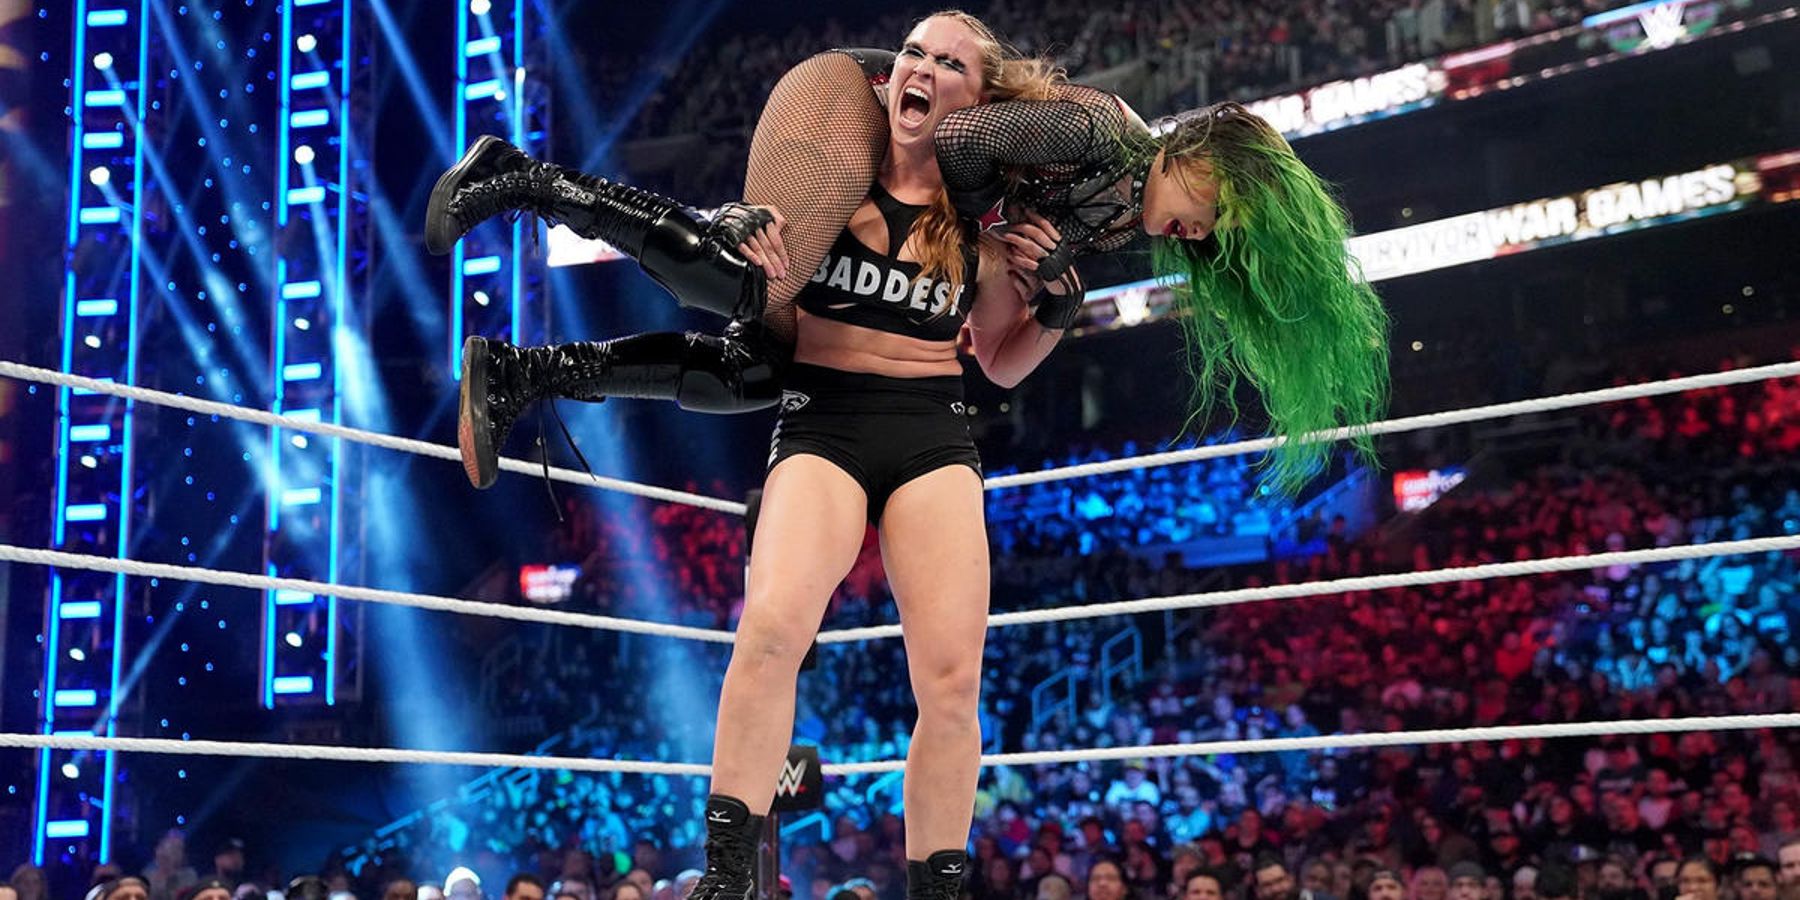 Ronda Rousey picks up Shotzi Blackheart during their match at WWE Survivor Series in 2022.